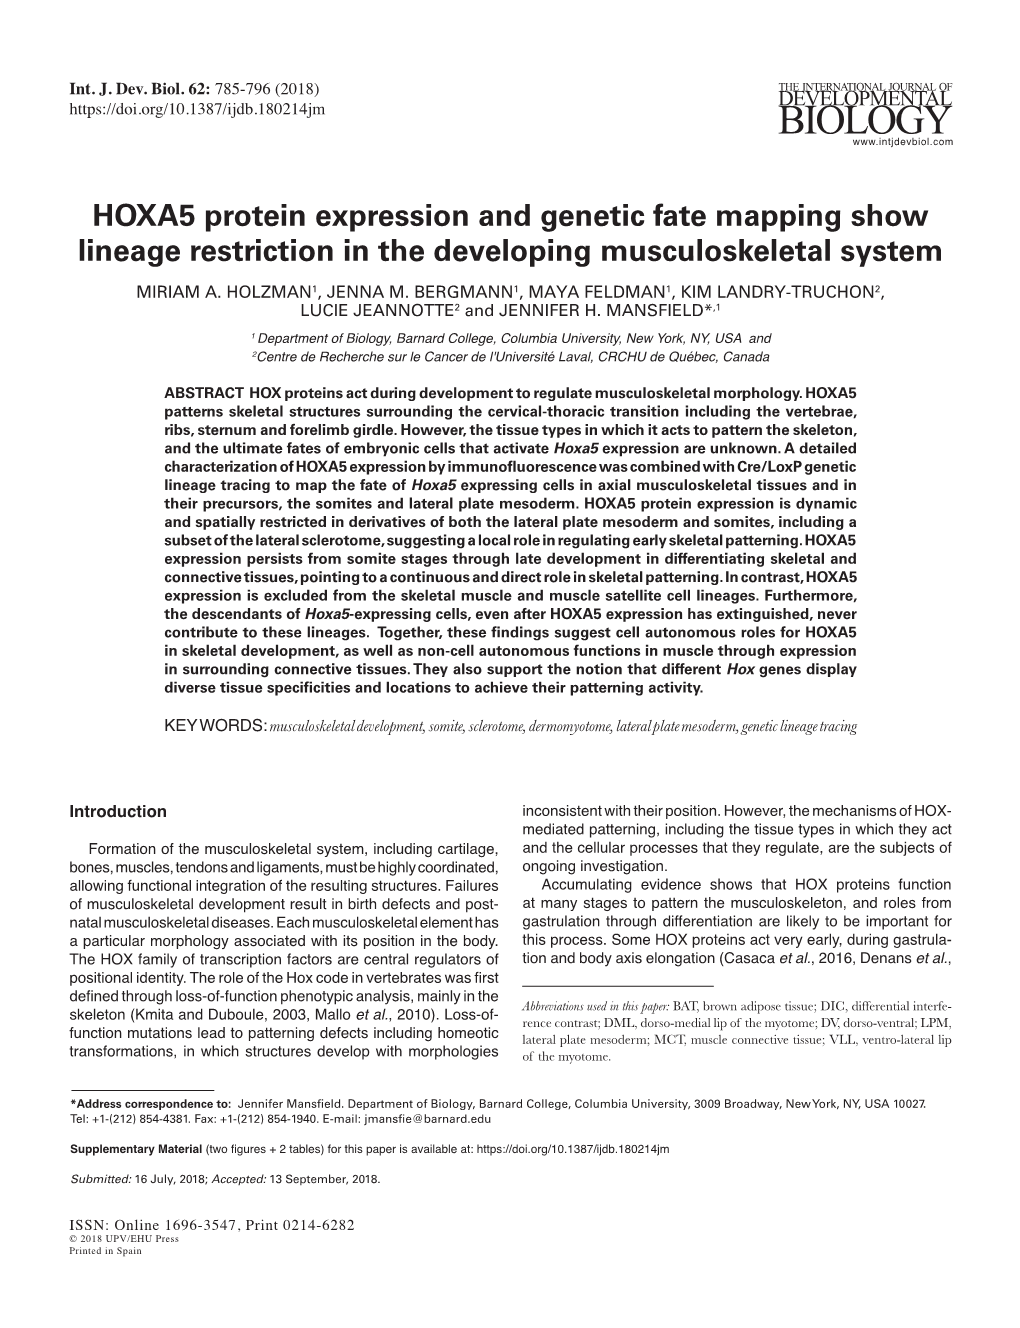 HOXA5 Protein Expression and Genetic Fate Mapping Show Lineage Restriction in the Developing Musculoskeletal System MIRIAM A